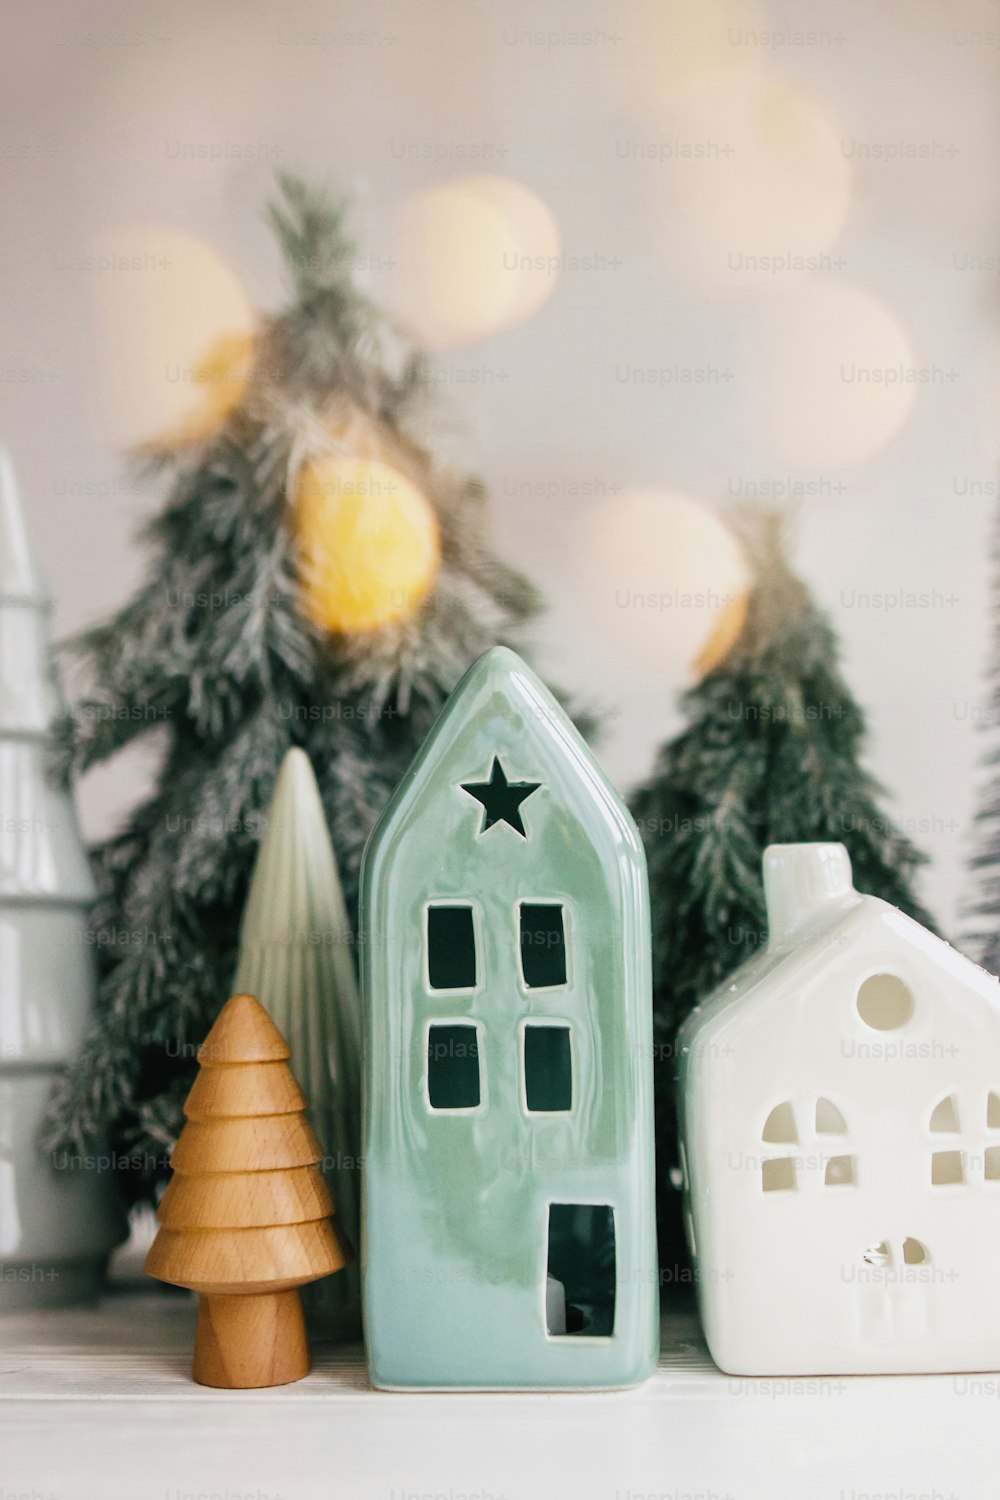 Christmas scene, miniature holiday village. Christmas lights, little ceramic houses, wooden and snowy fir trees on white background. Festive modern decorations on table. Merry Christmas